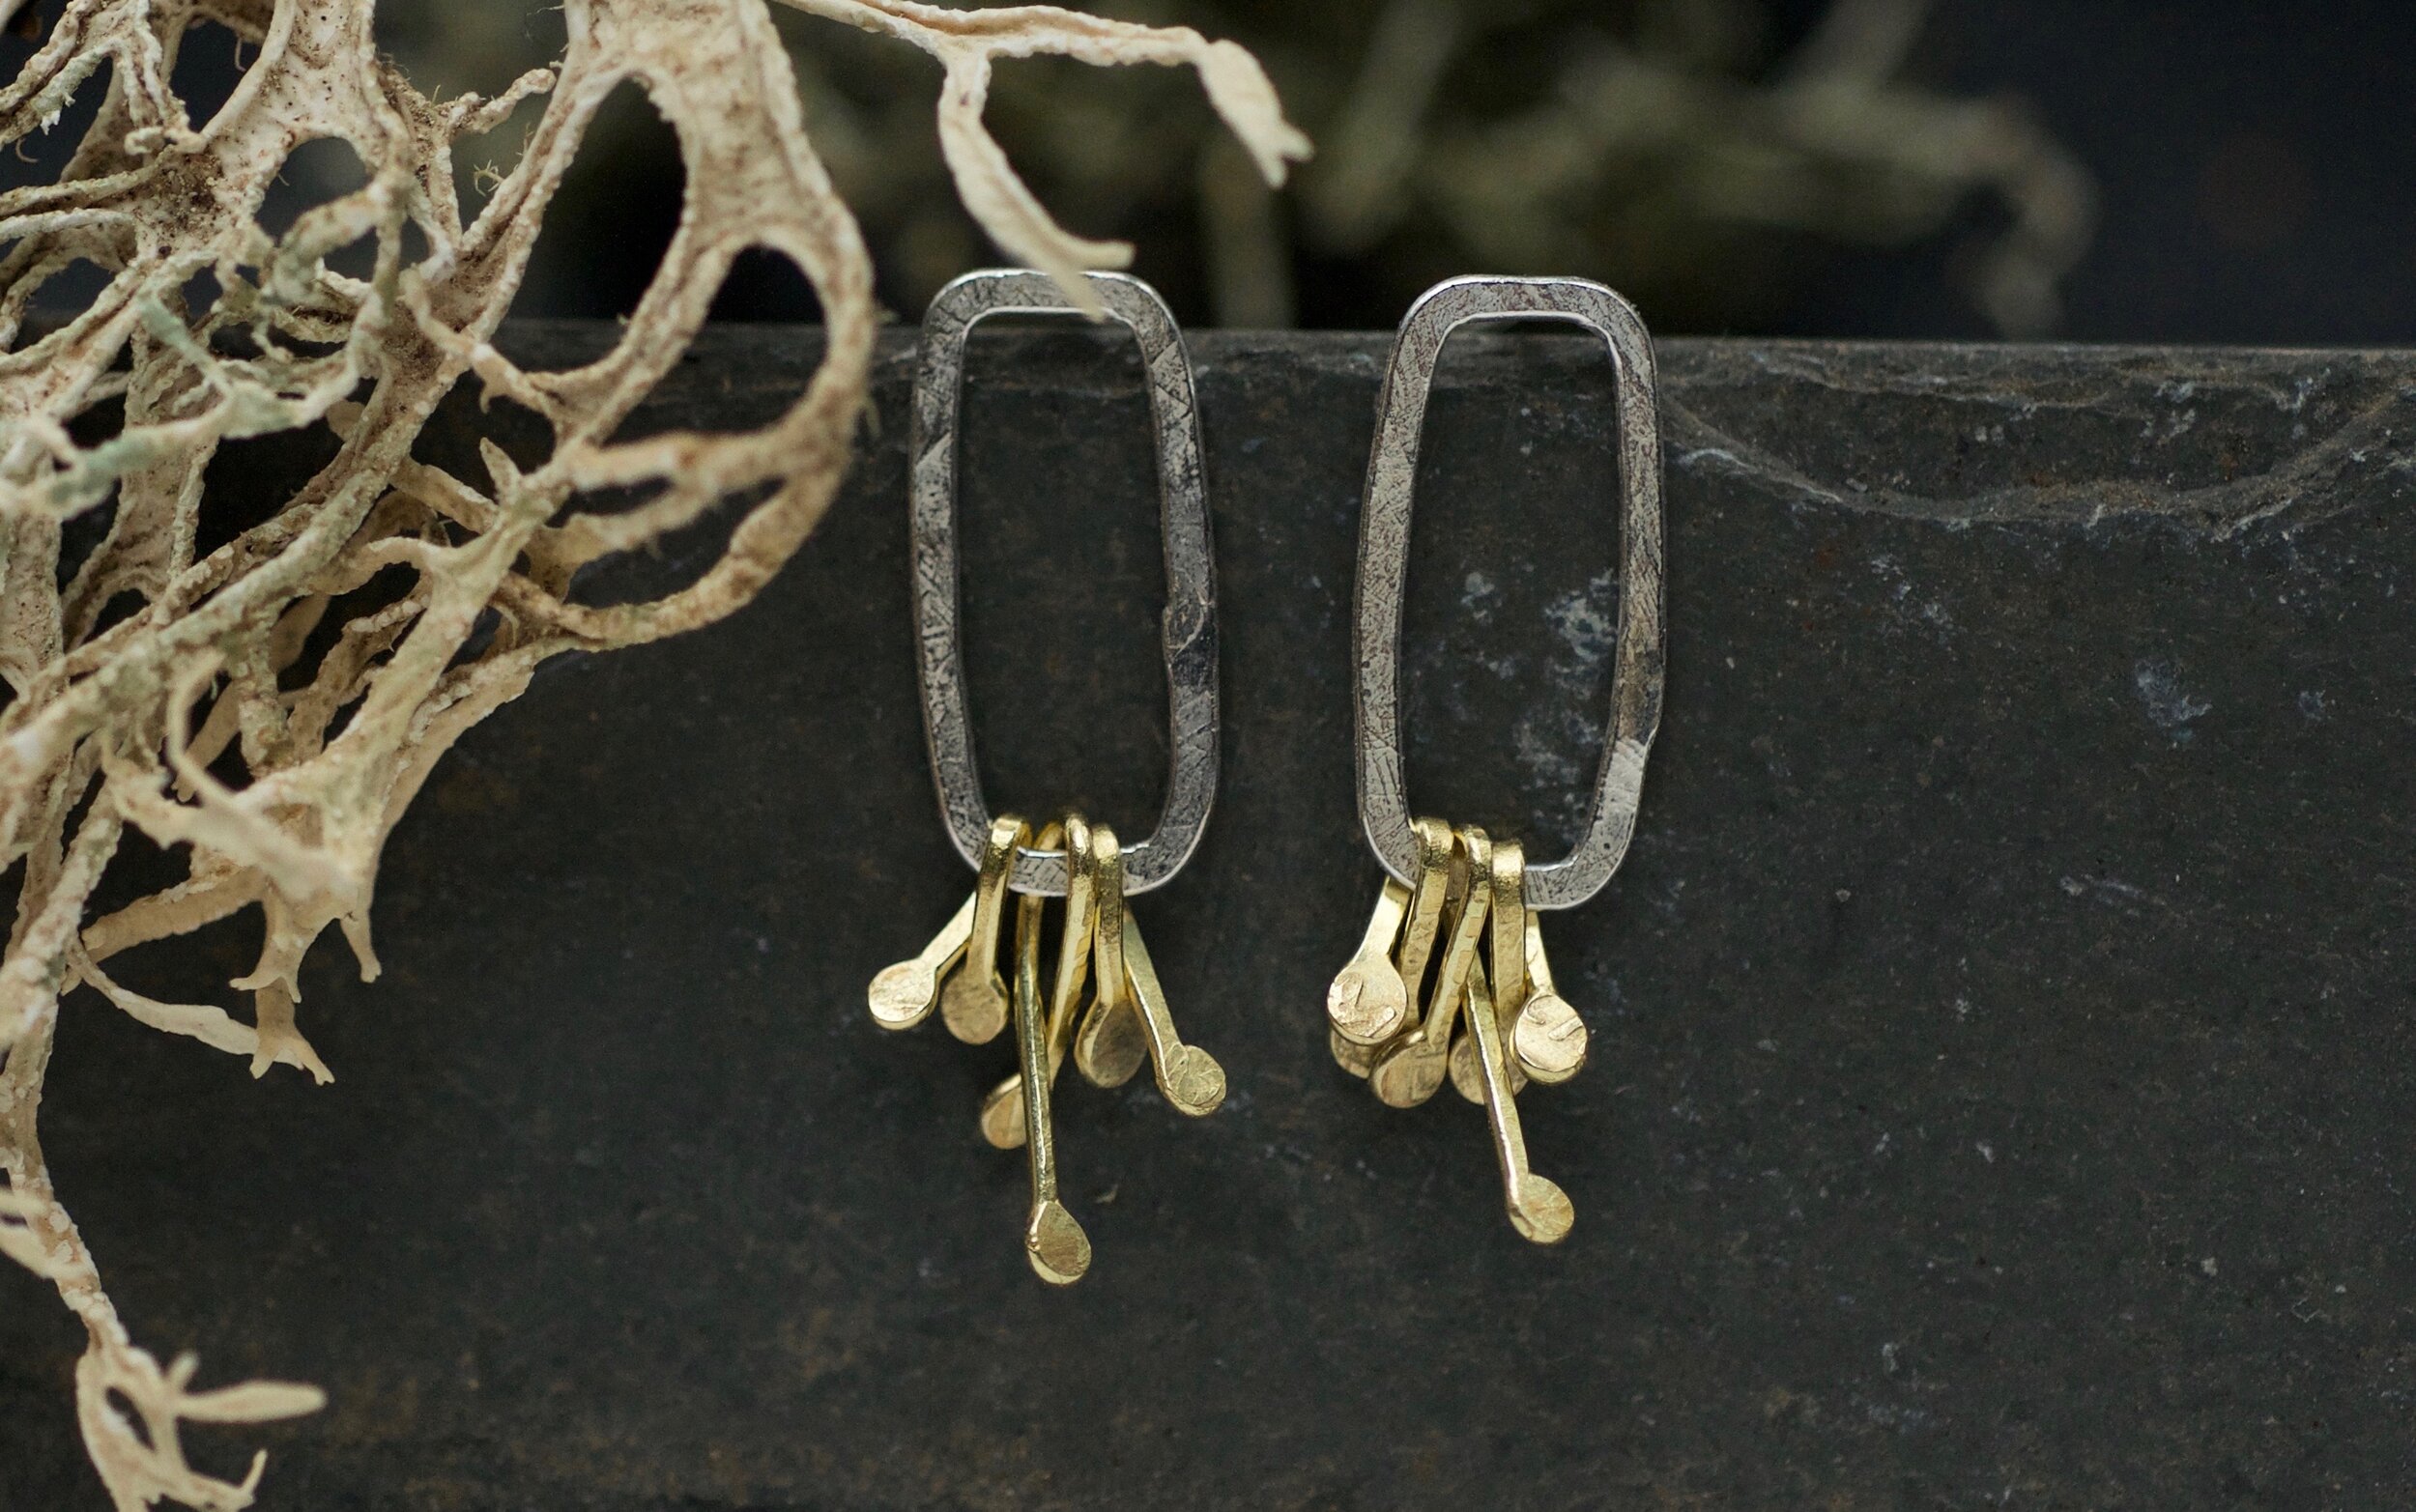 Open silver rectangle earrings with gold cluster details at the bottom